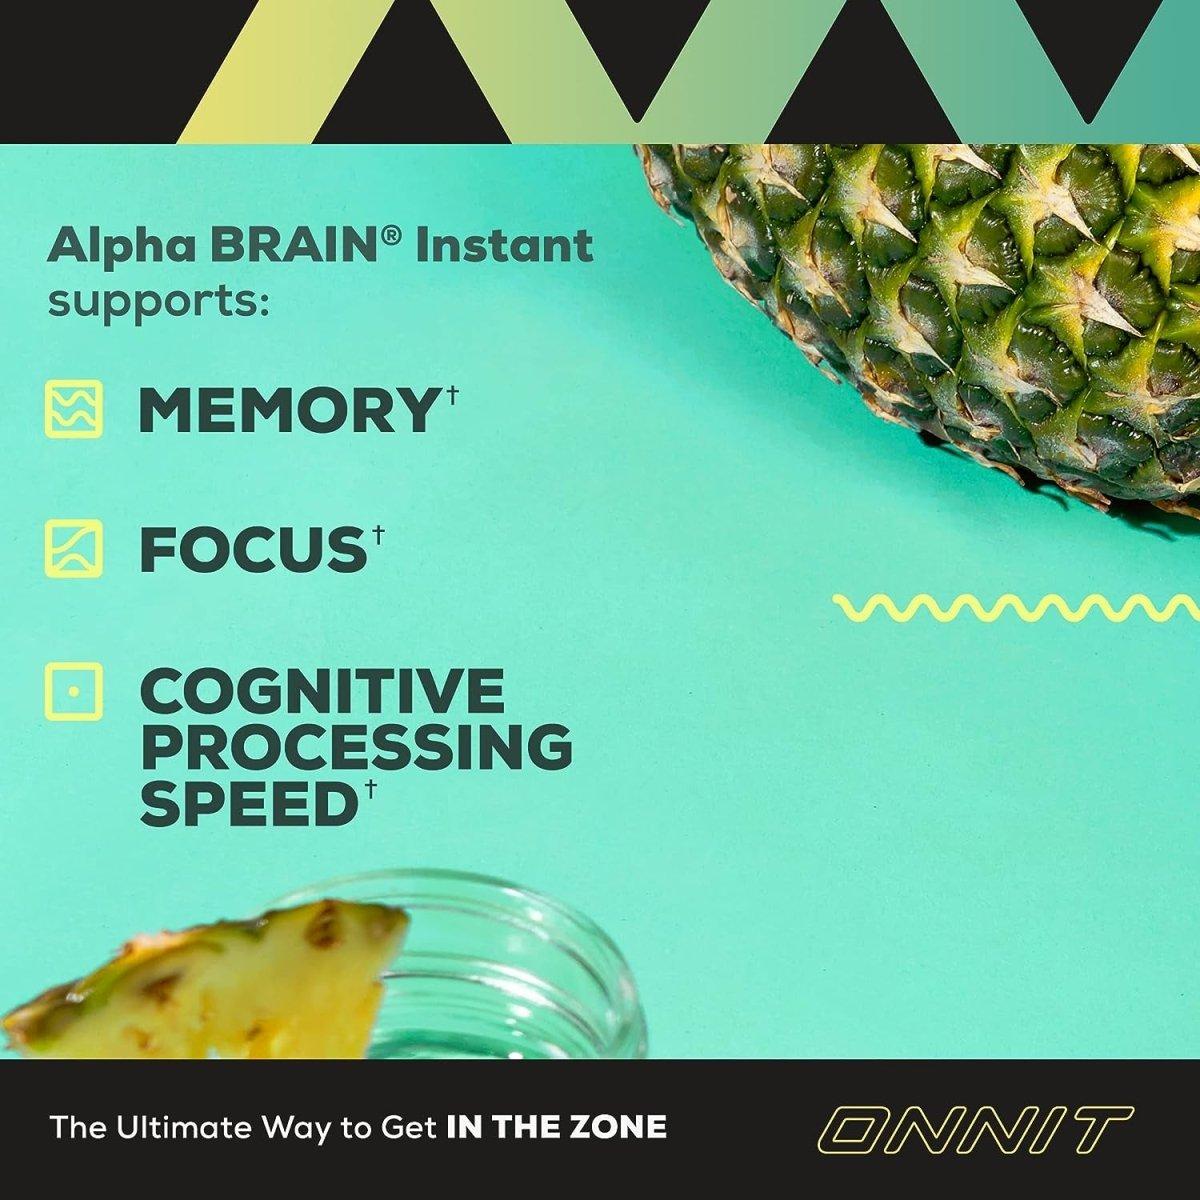 Alpha Brain Instant - Pineapple Punch Flavor - Nootropic Brain Booster Memory Supplement - Brain Support for Focus, Energy & Clarity - Alpha GPC Choline, Cats Claw, L-Theanine, Bacopa - 30Ct - Glam Global UK